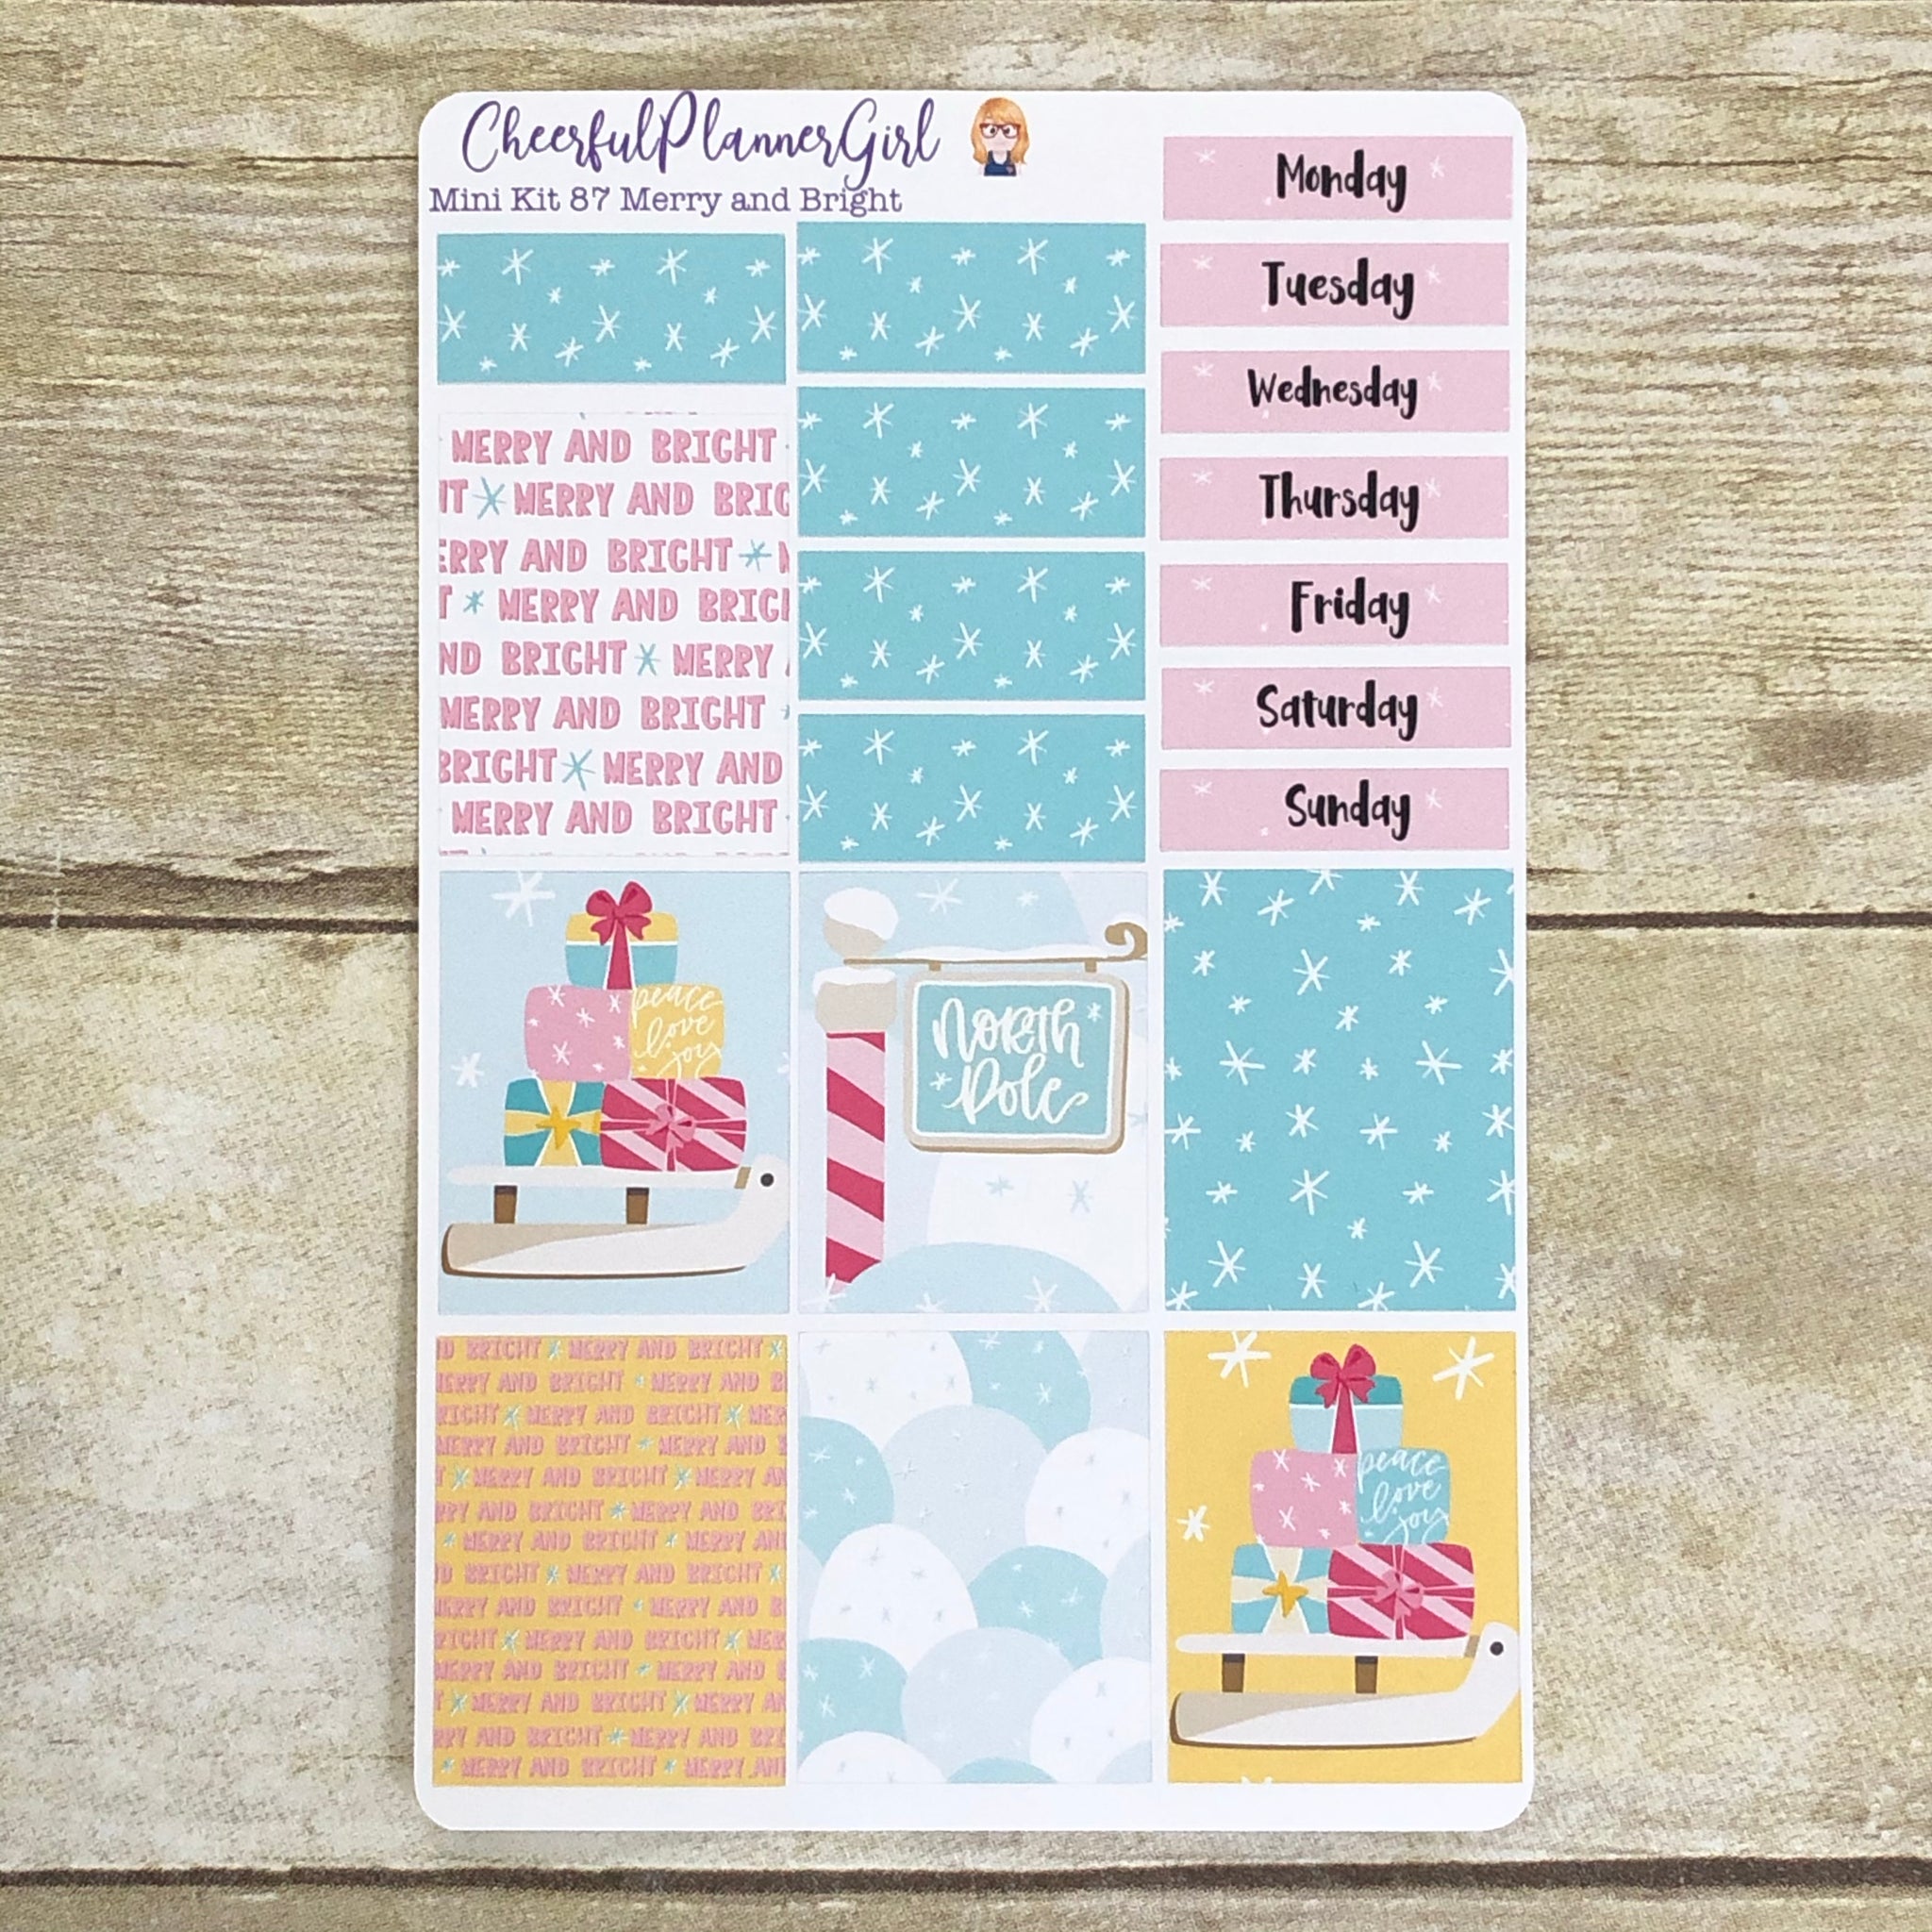 Merry and Bright Mini Kit Weekly Layout Planner Stickers